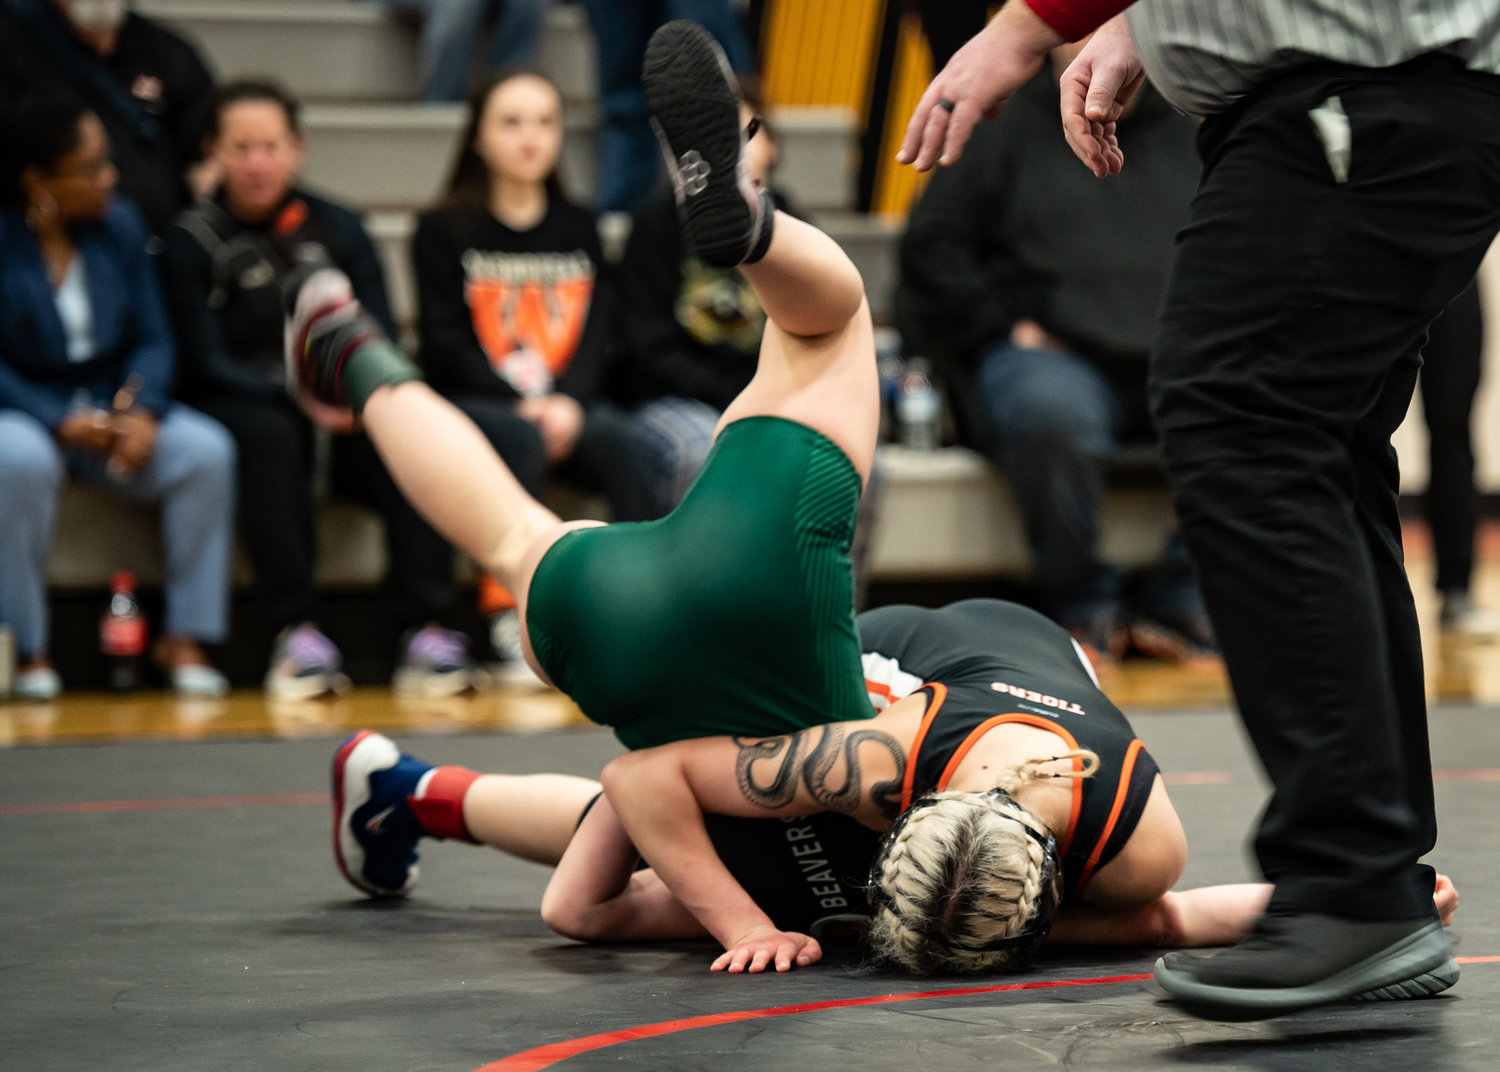 Centralia's Jade Hudson (right) wrestles with a Woodland grappler Saturday afternoon at the 1B/2B/1A/2A Regional in Shelton.